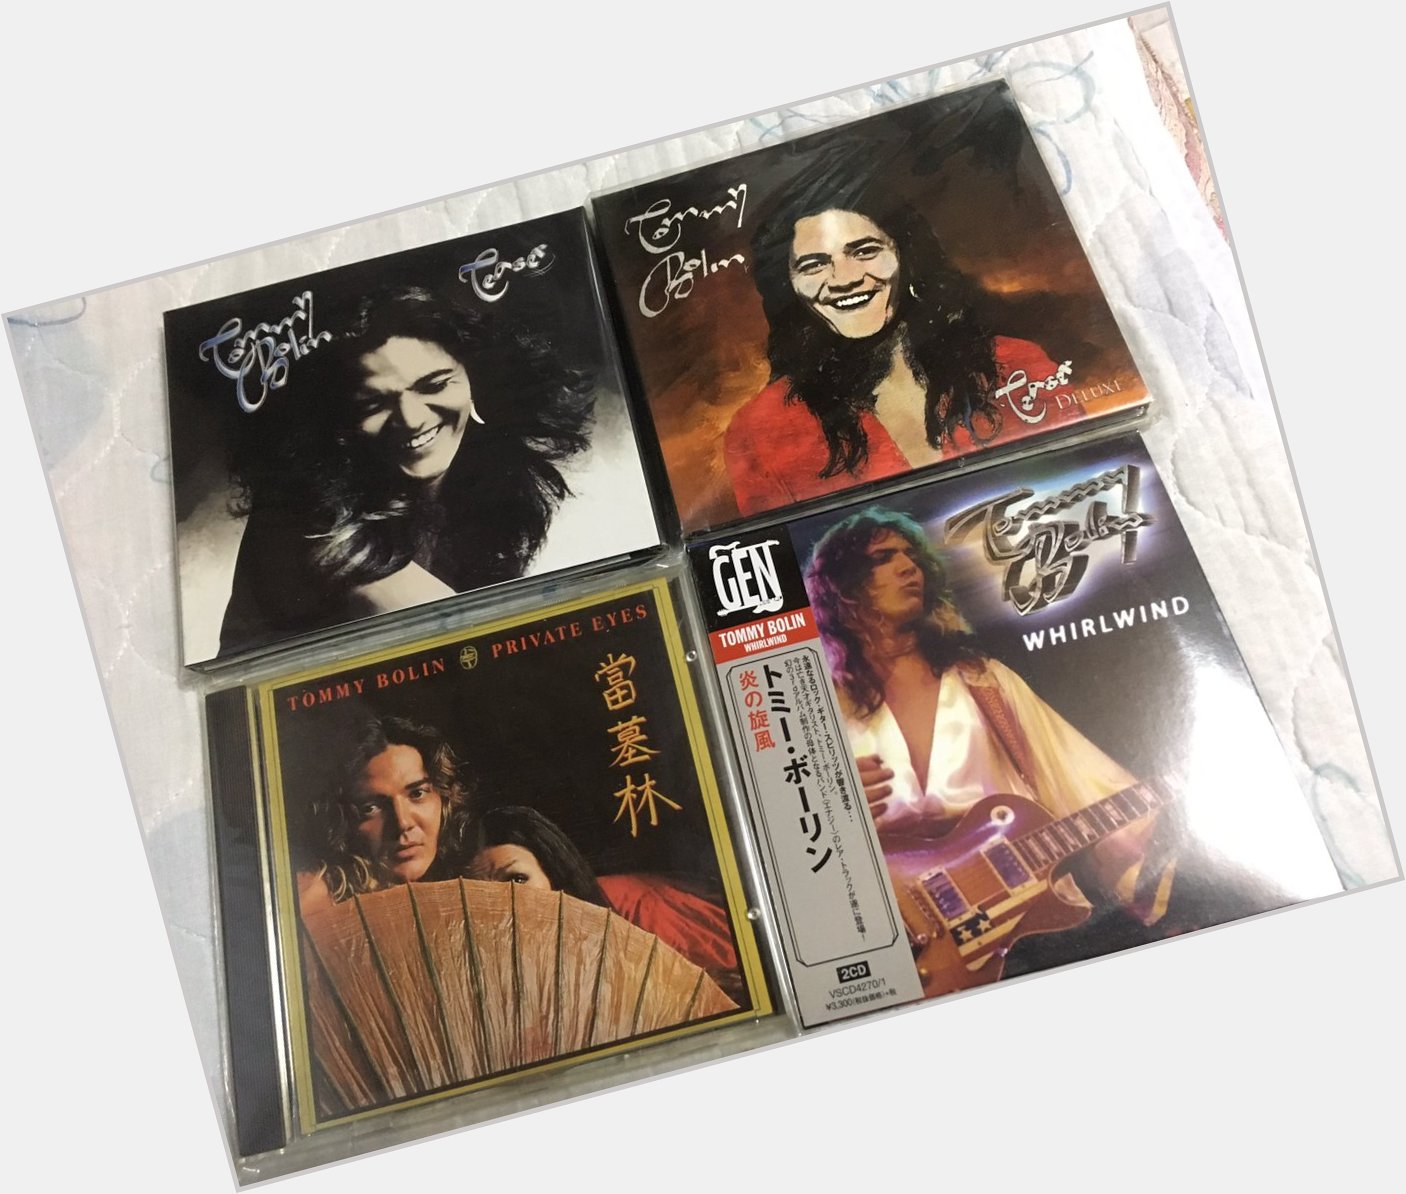 HAPPY BIRTHDAY TOMMY BOLIN                       The Ultimate TEASER 3CD\s TEASER DELUXE PRIVATE EYES WHIRWIND 